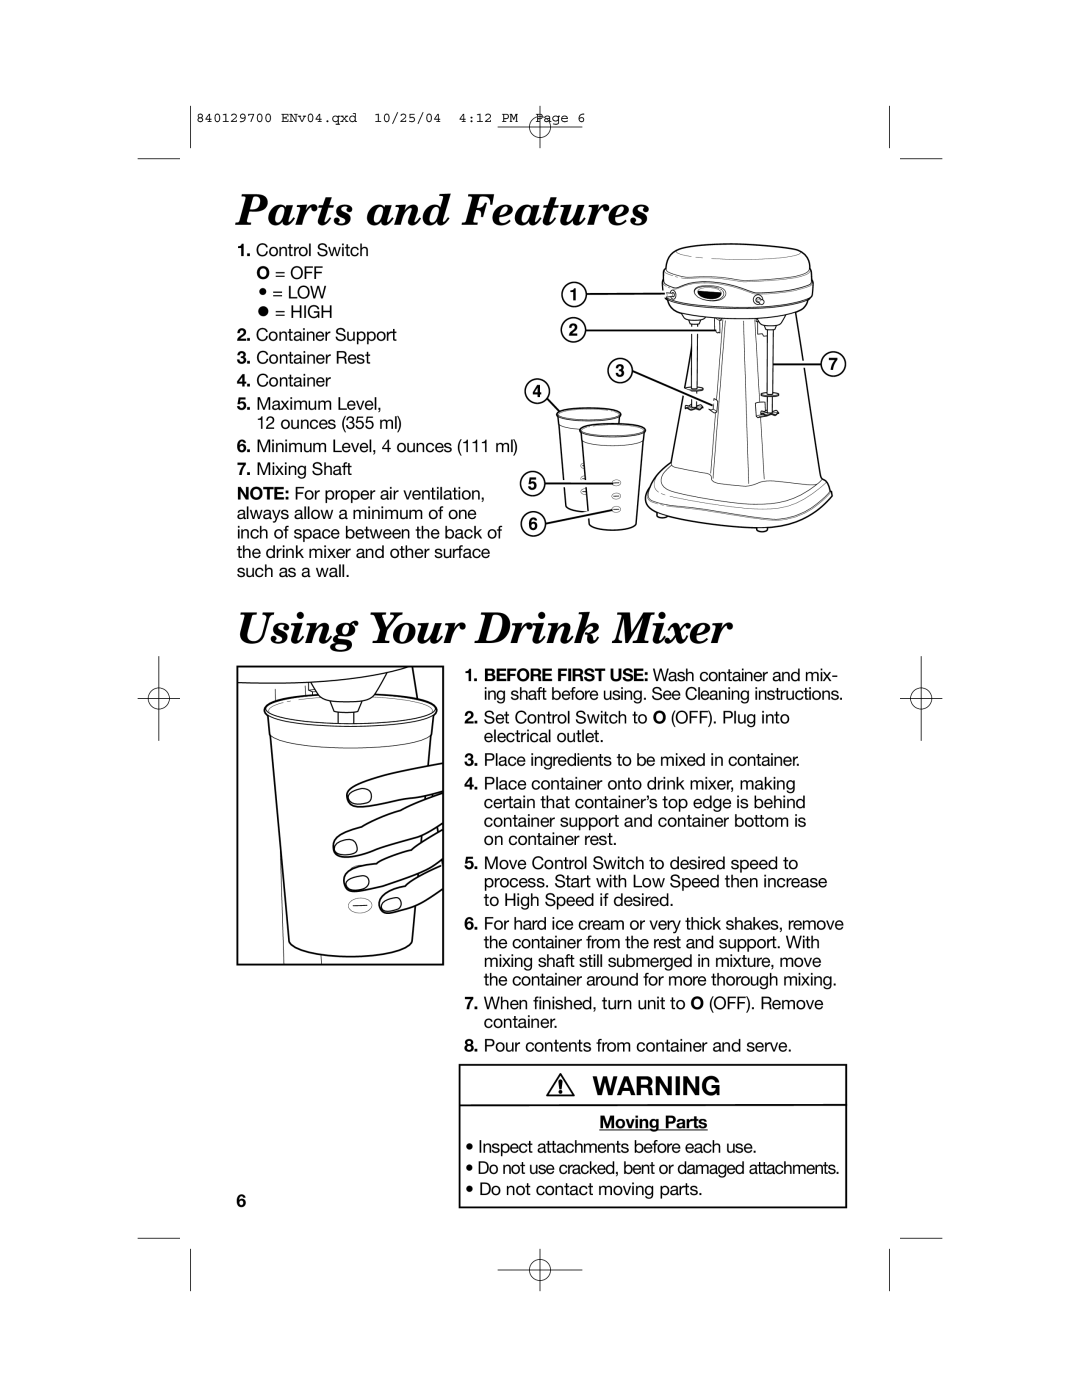 Hamilton Beach manual Parts and Features, Using Your Drink Mixer, Moving Parts 